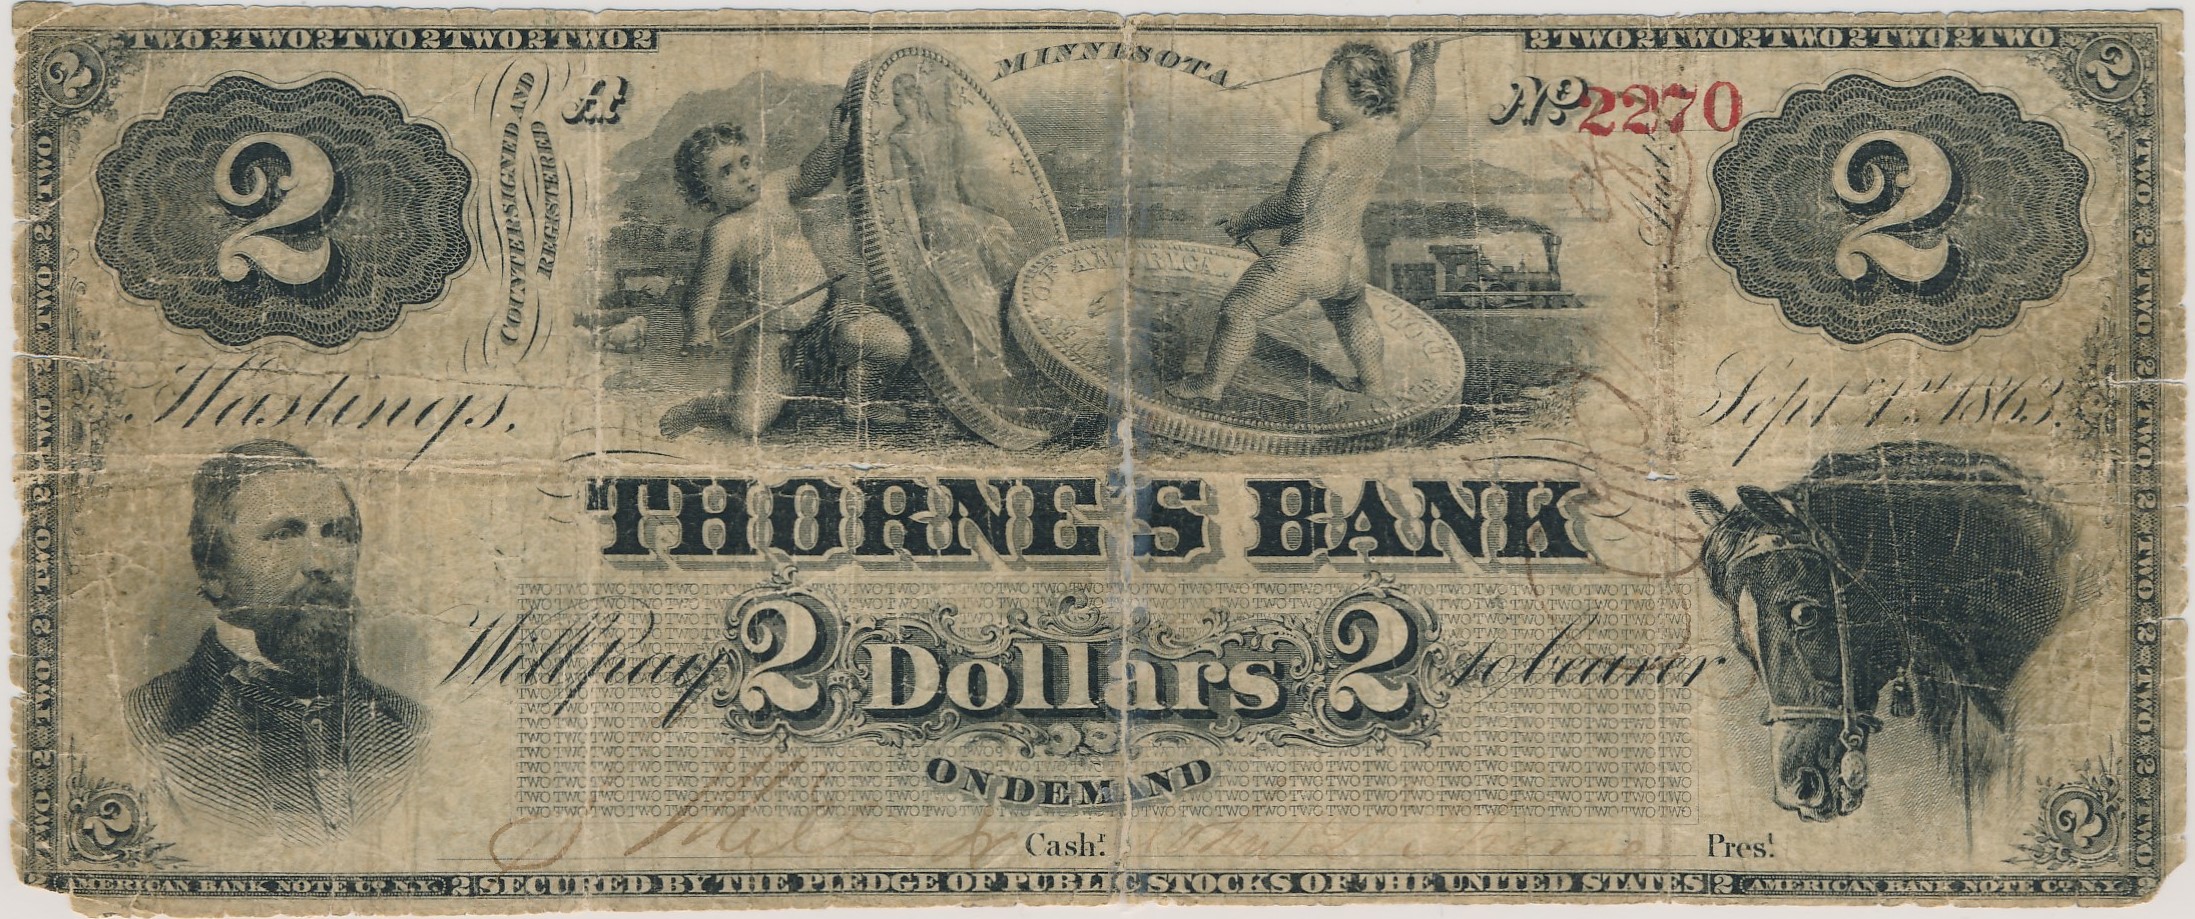 Thorne’s Bank